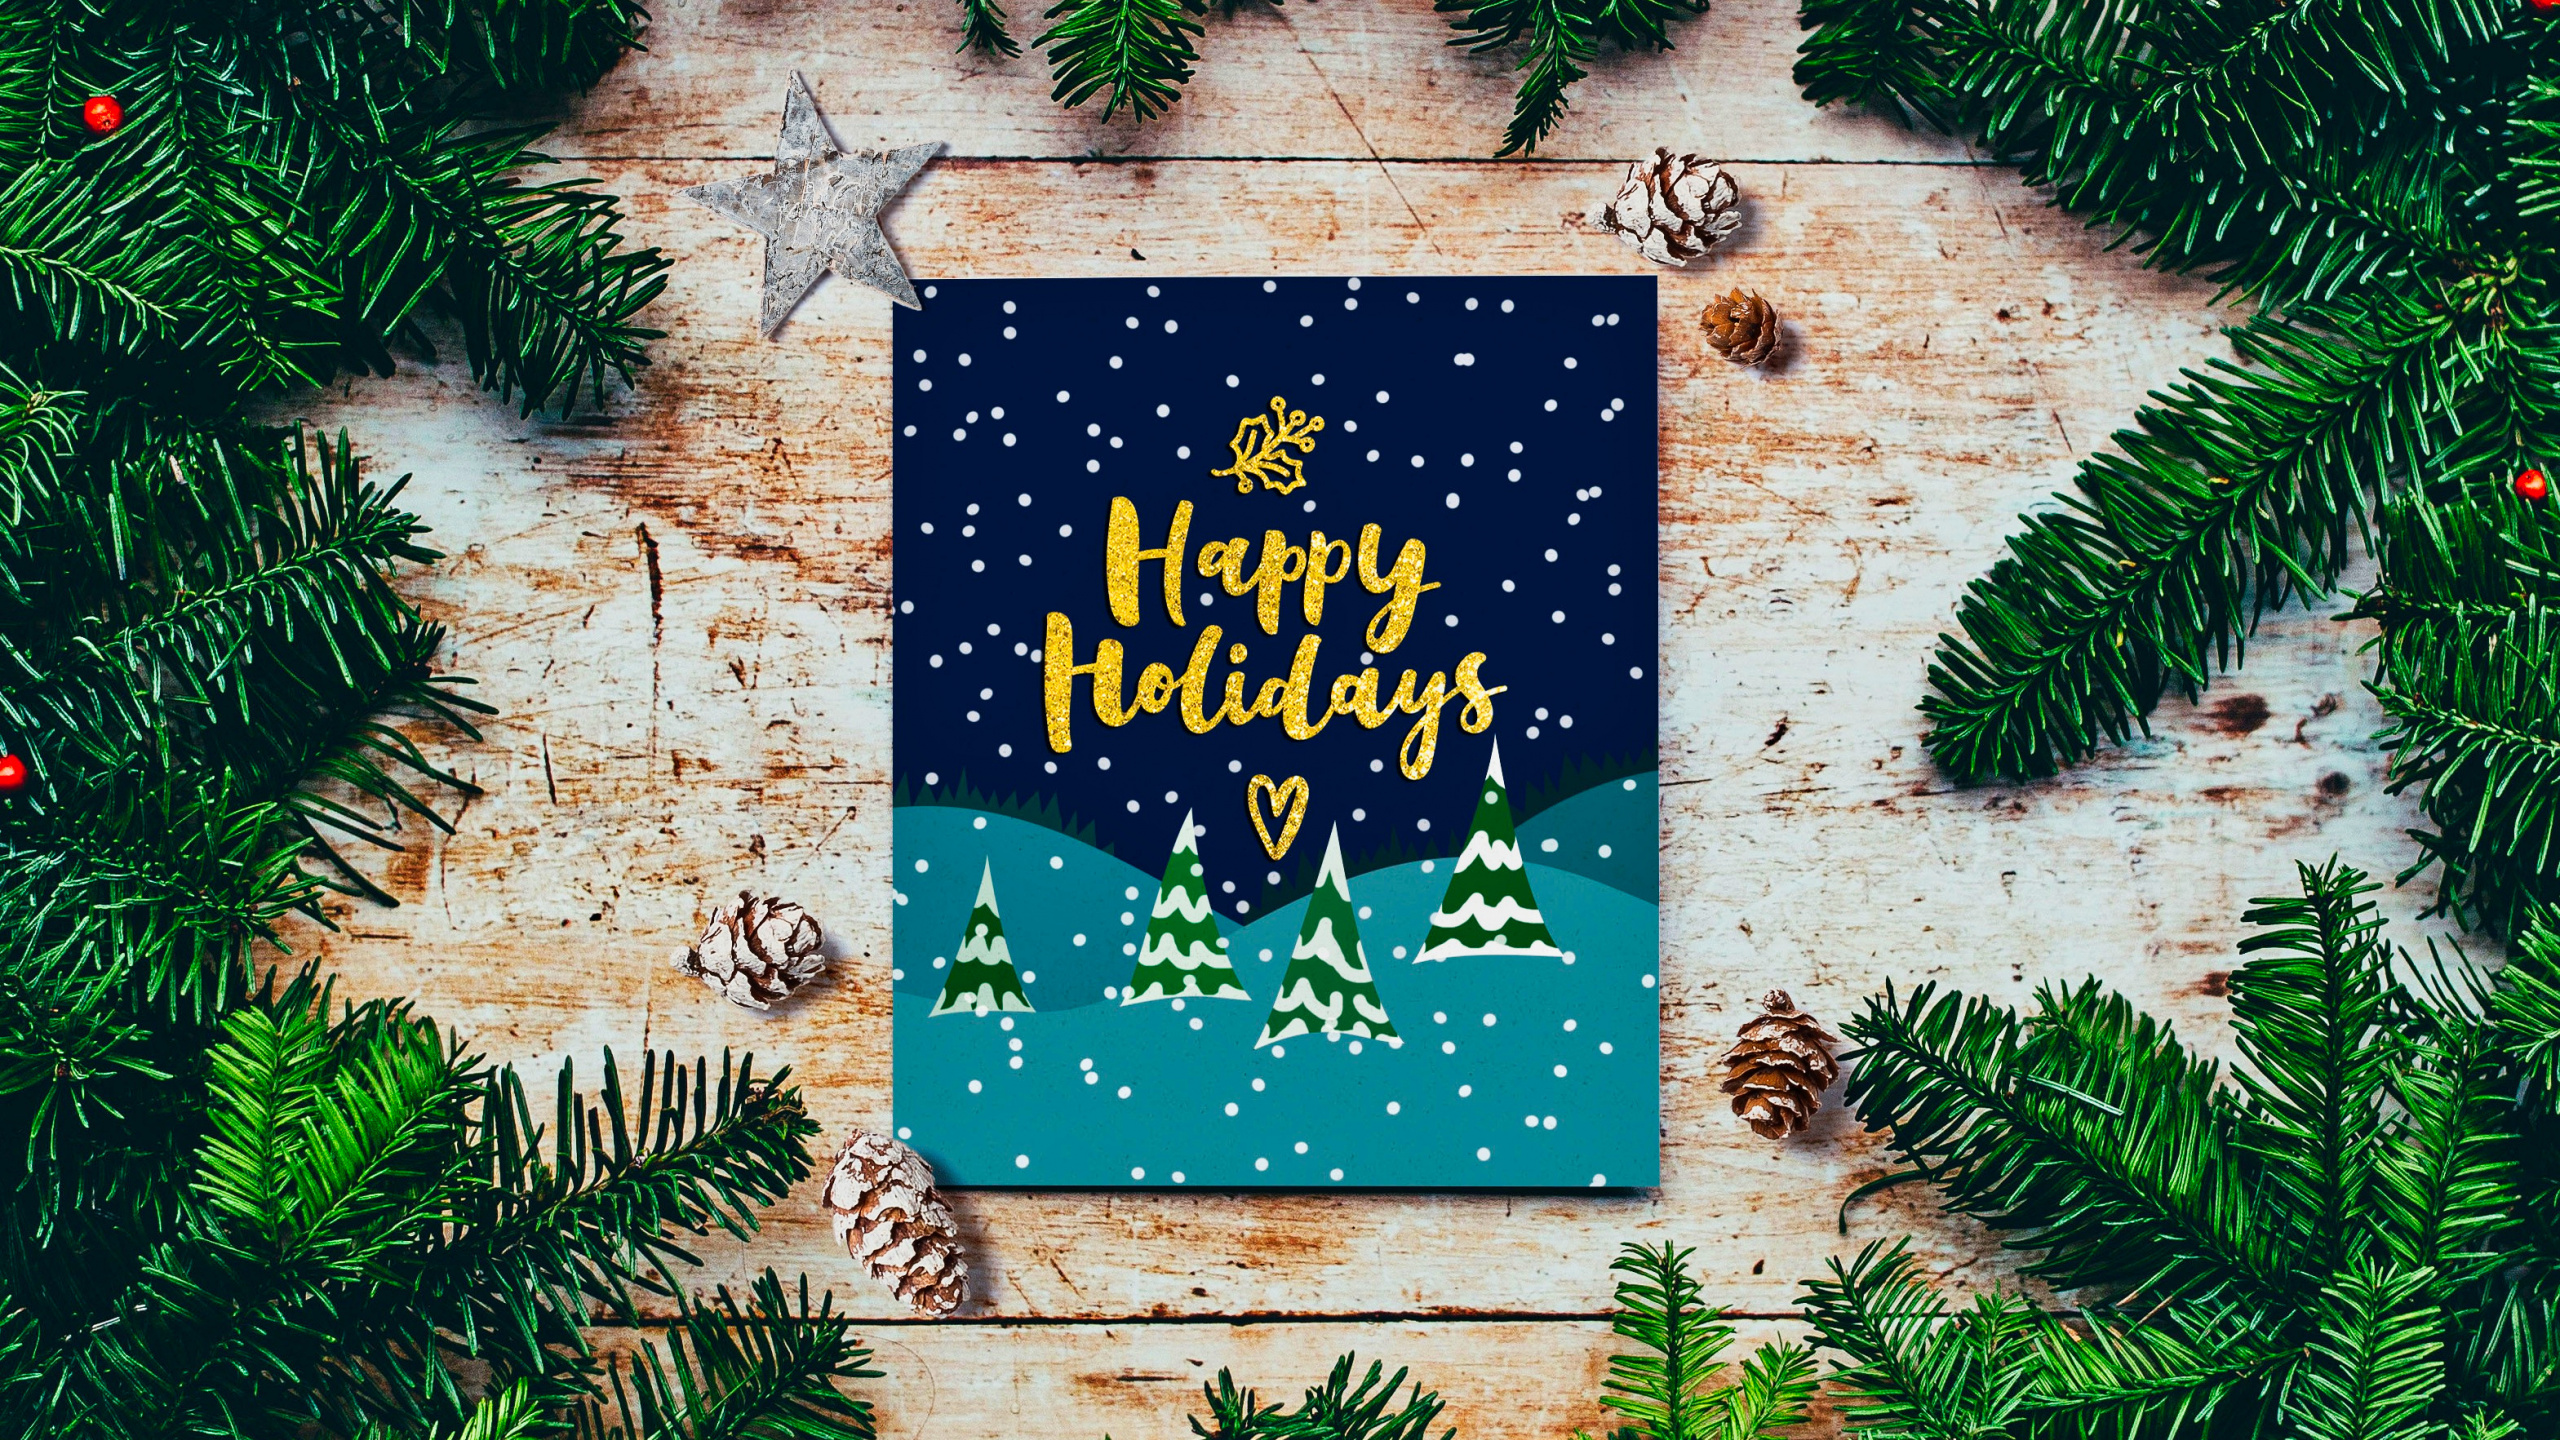 Download Happy holidays, Merry Christmas, Happy New Year, greetings, 2019 wallpaper, 2560x Dual Wide, Widescreen 16: Widescreen